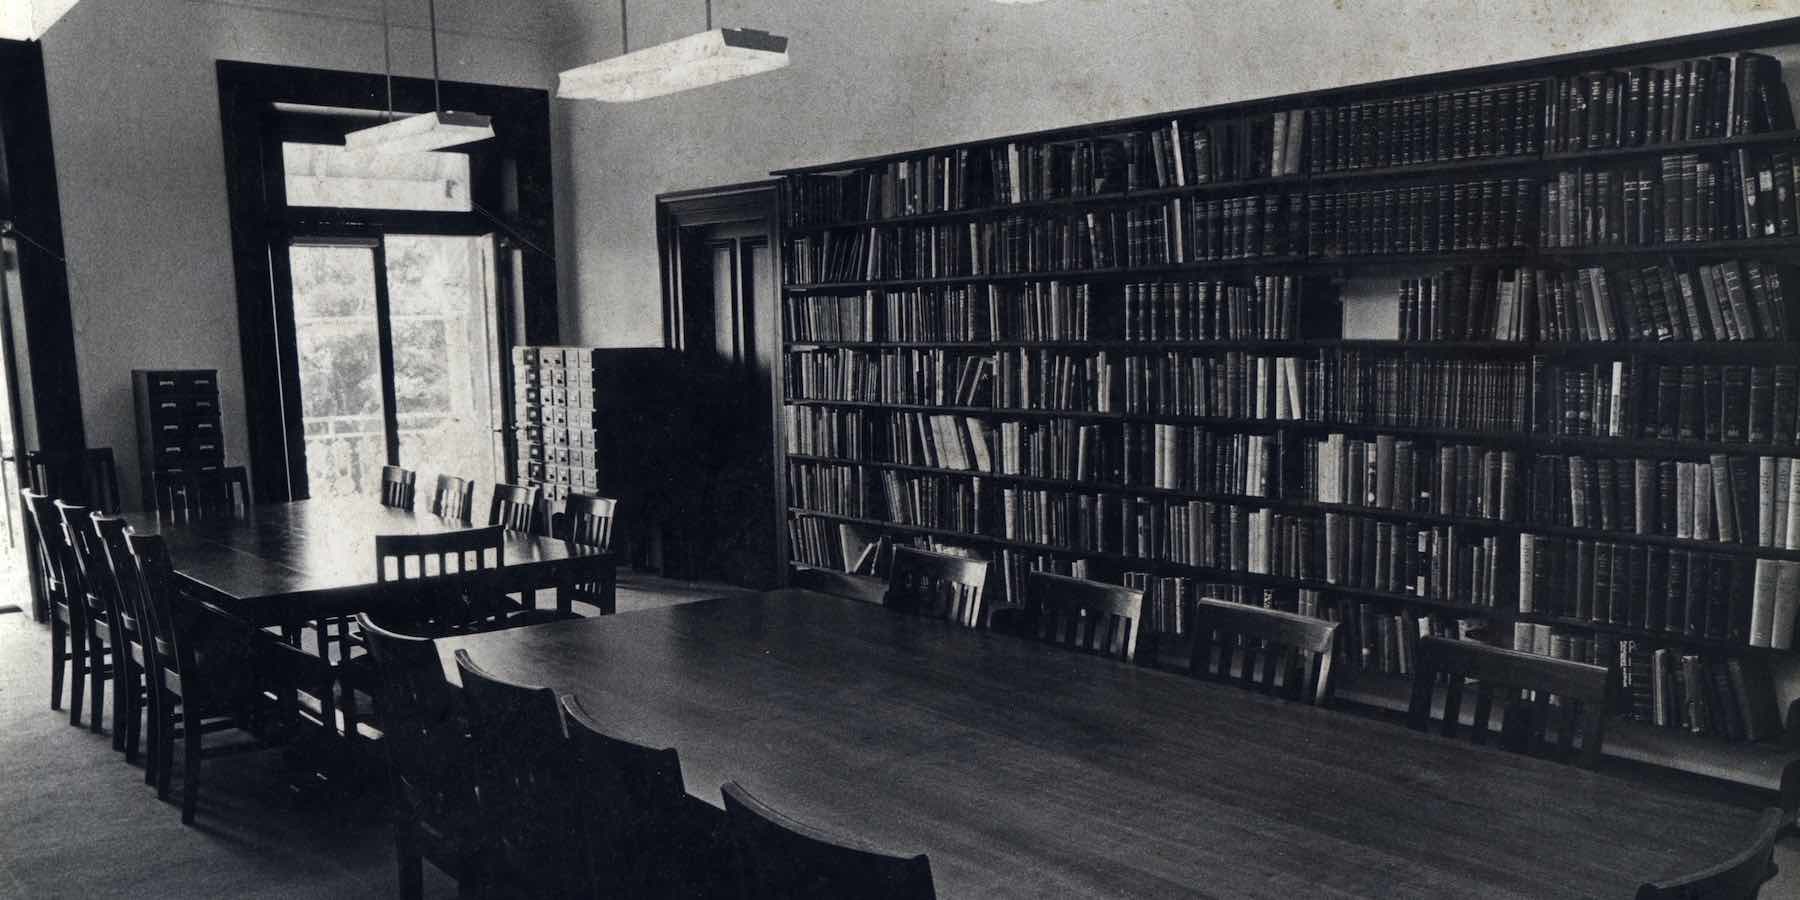 In the library's centre are two long wooden tables with wooden chairs. The back wall features seven shelves that are filled with books. A window and a set of archive drawers are in the corner of the room.